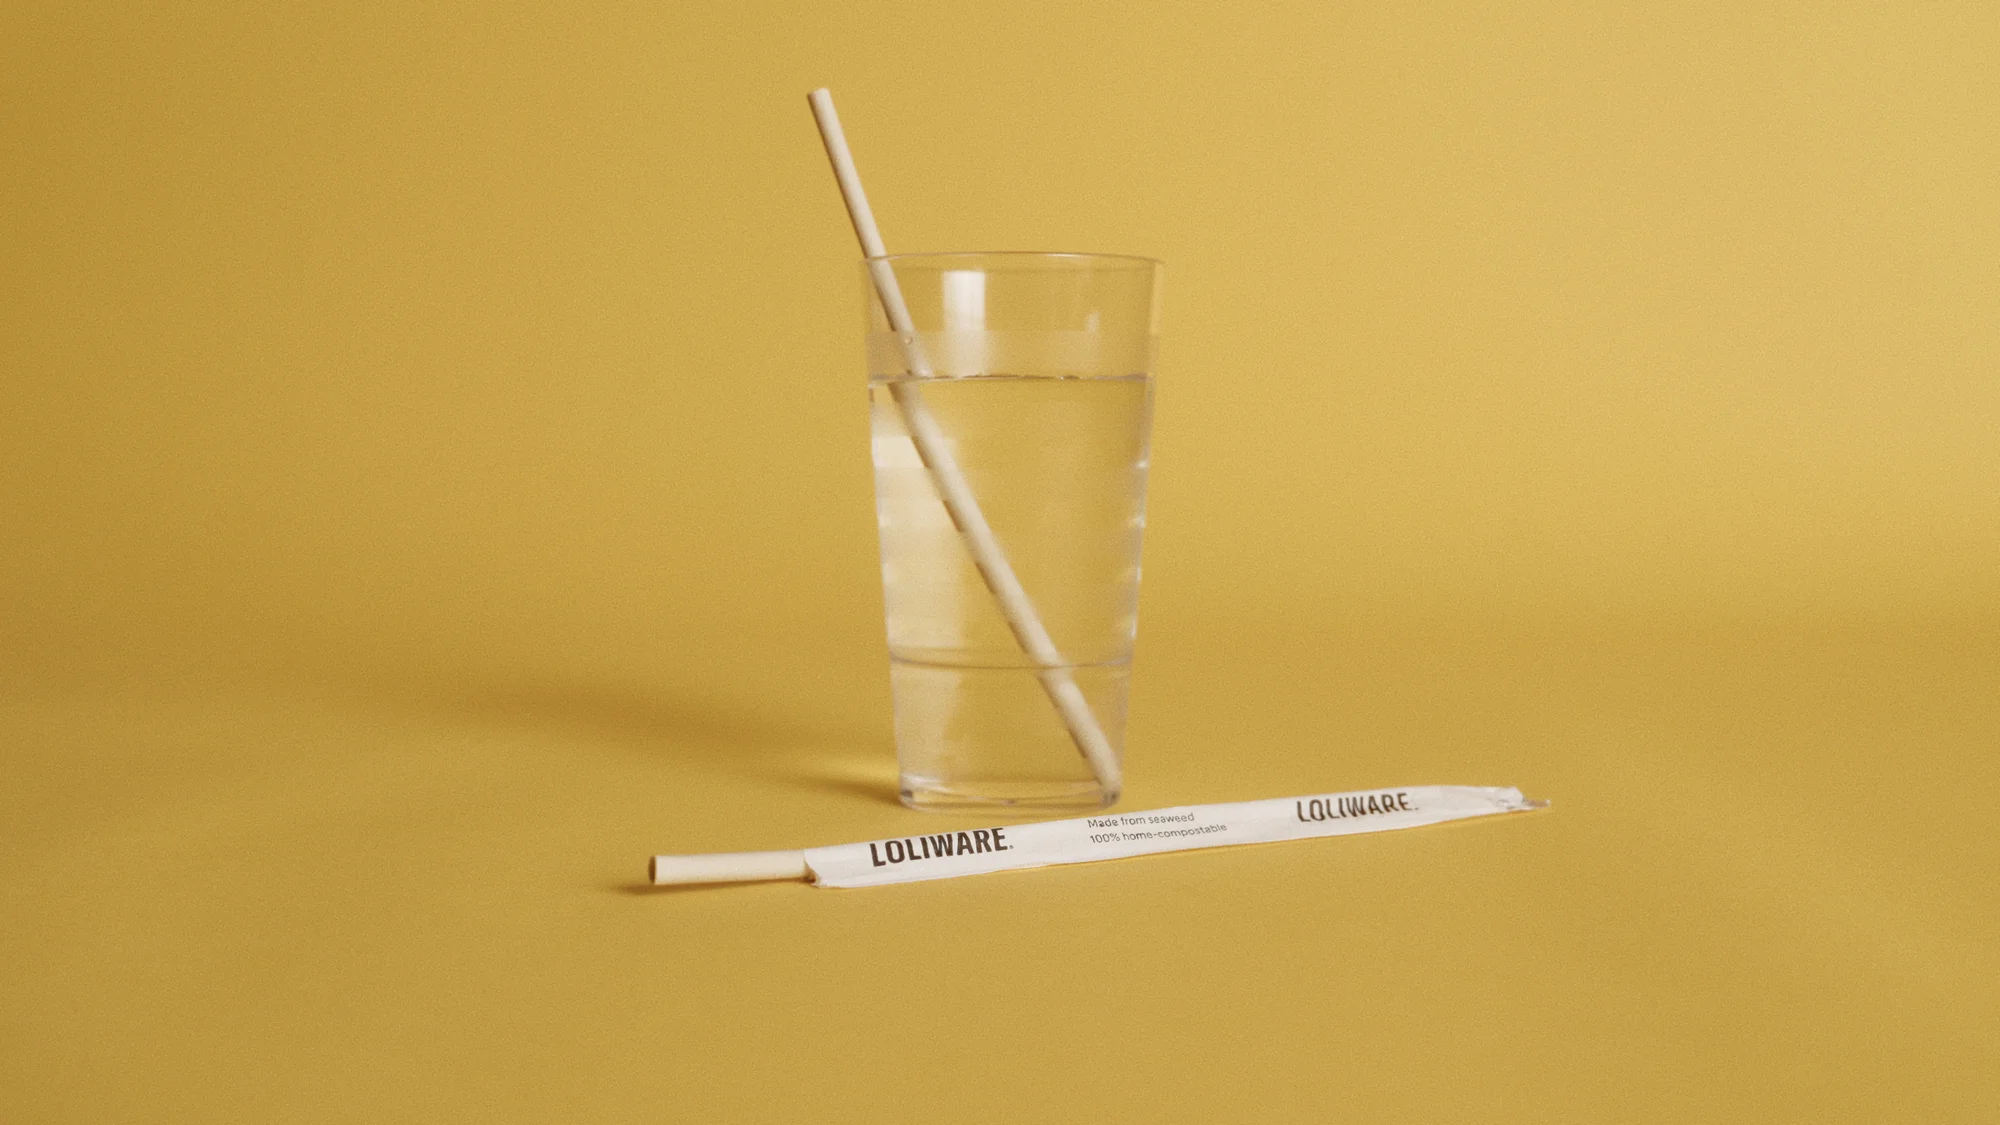 Loliware manufactures straws and cutlery made out of seaweed based materials and were chosen to test their products at select Google foodspaces as part of the Single-Use Plastics Challenge.